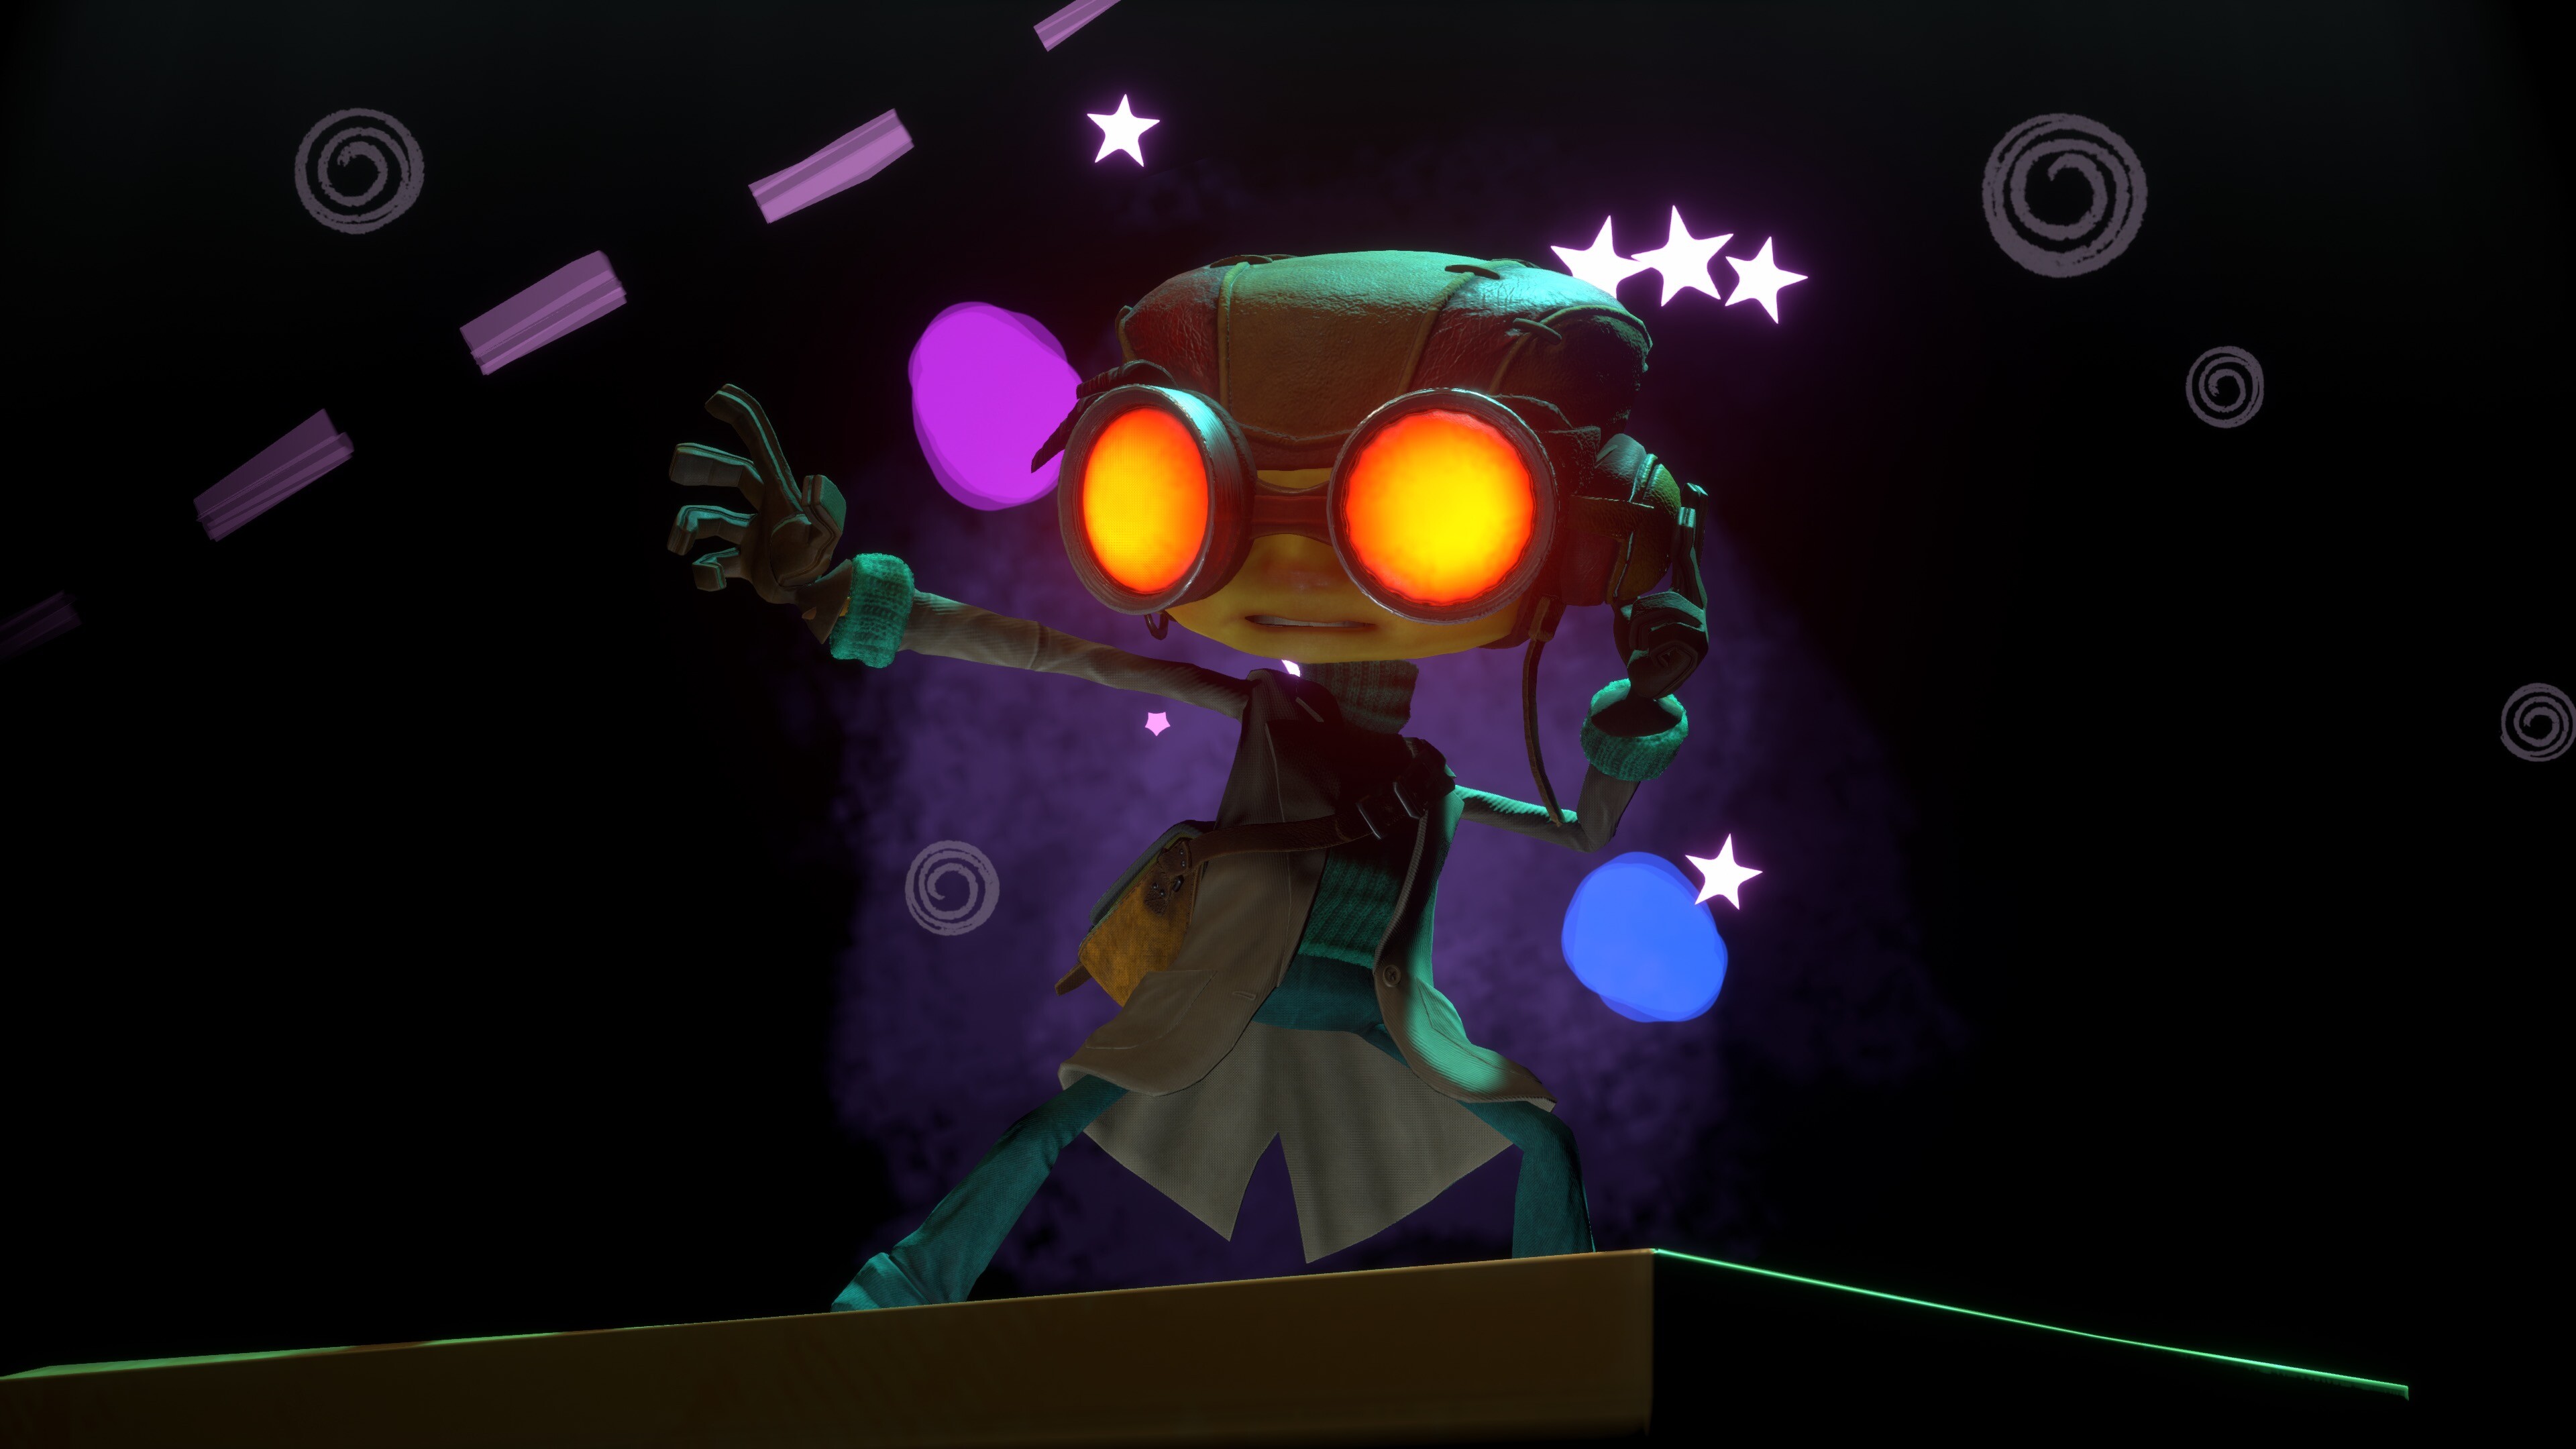 Psychonauts 2: The player controls Raz, a young acrobat that is training to become a Psychonaut. 3840x2160 4K Wallpaper.